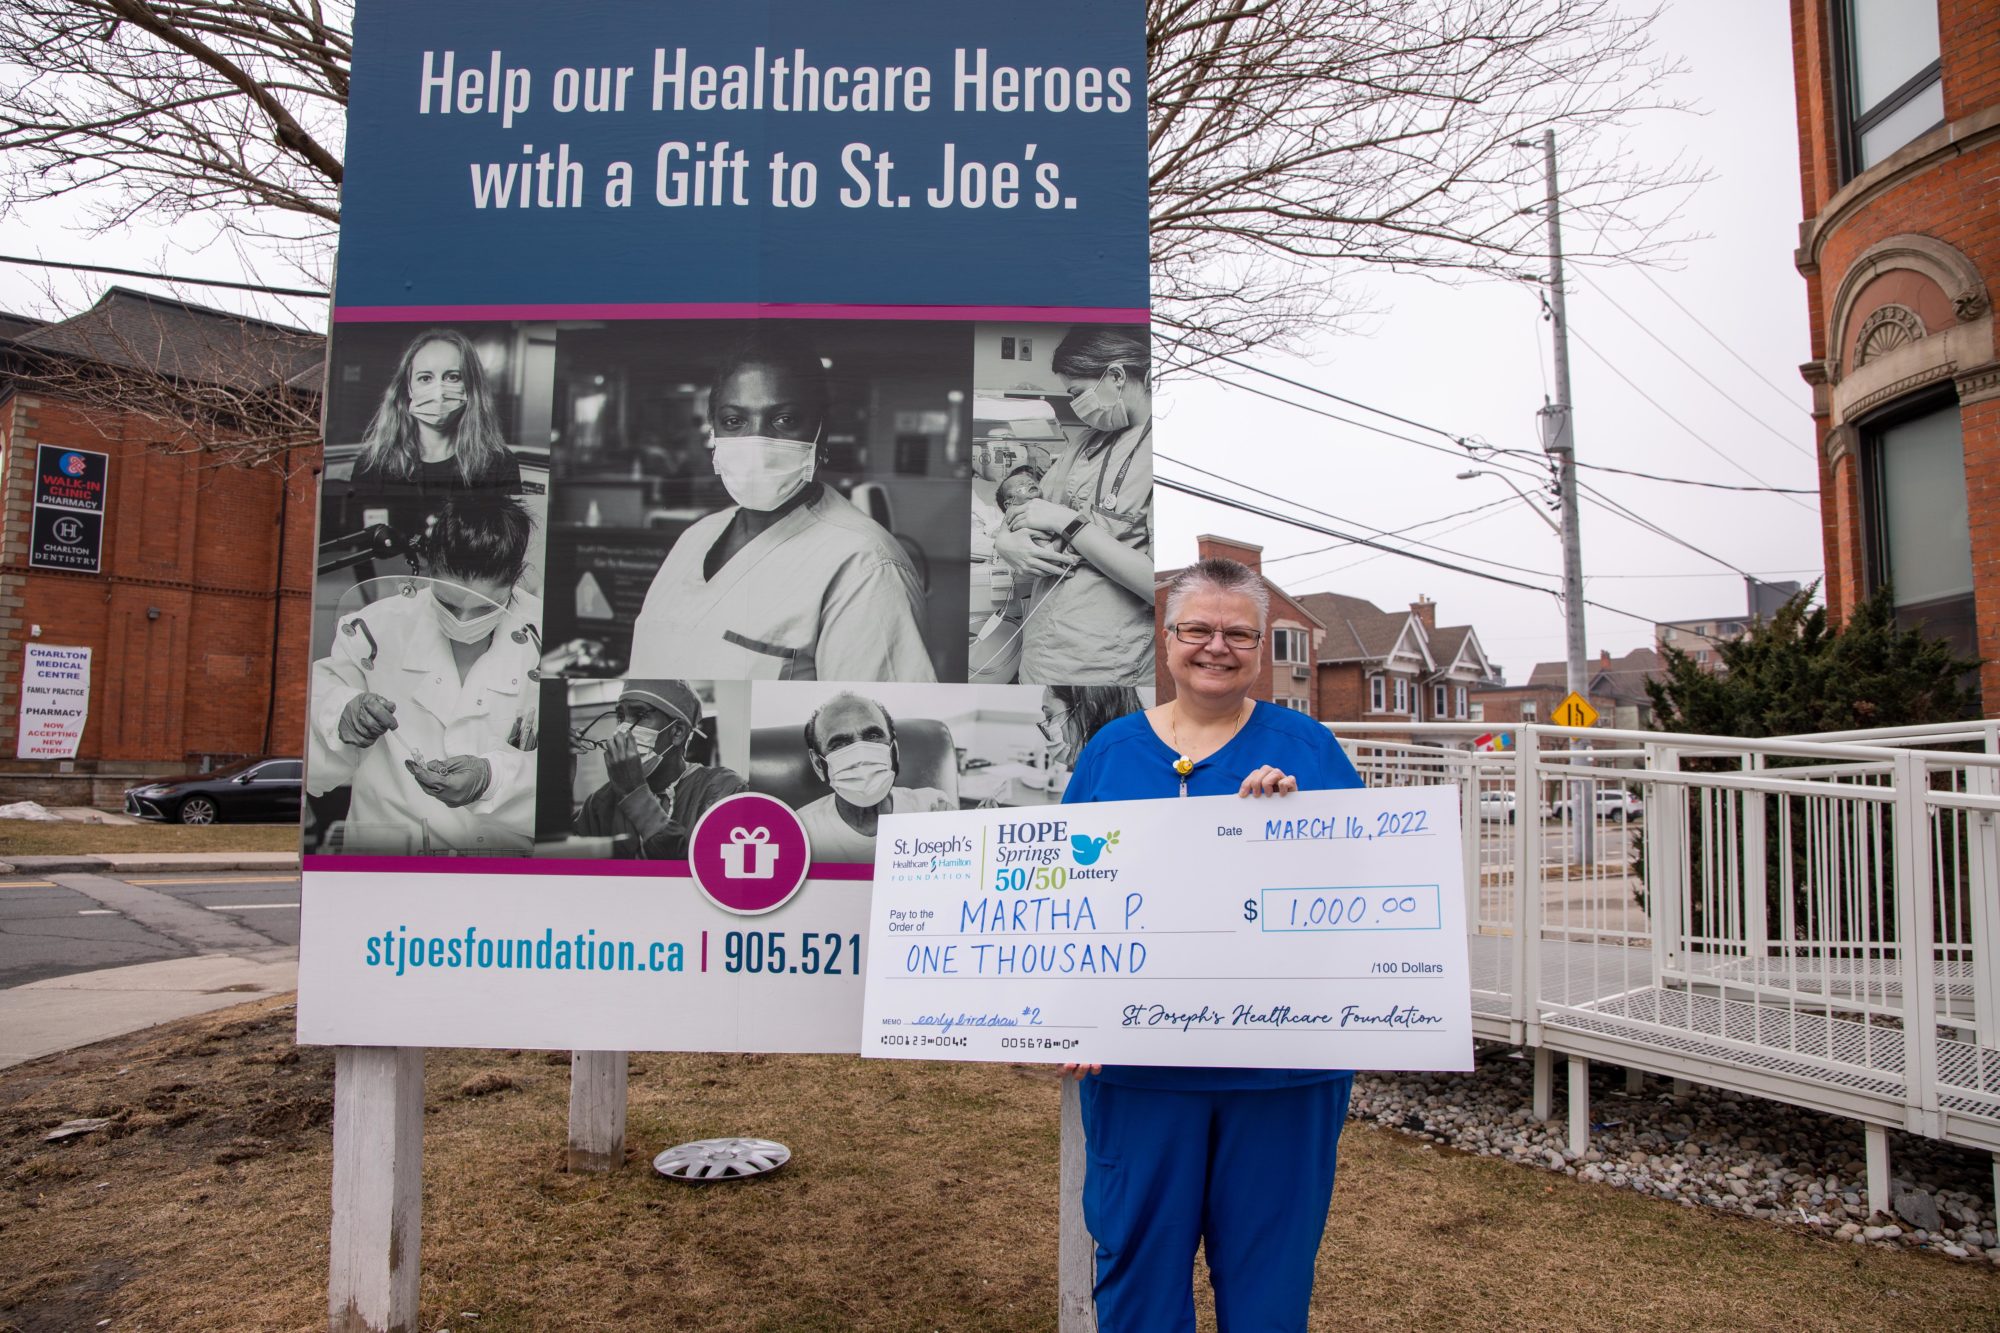 A nurse smiles while holding up a large cheque for $1,000.